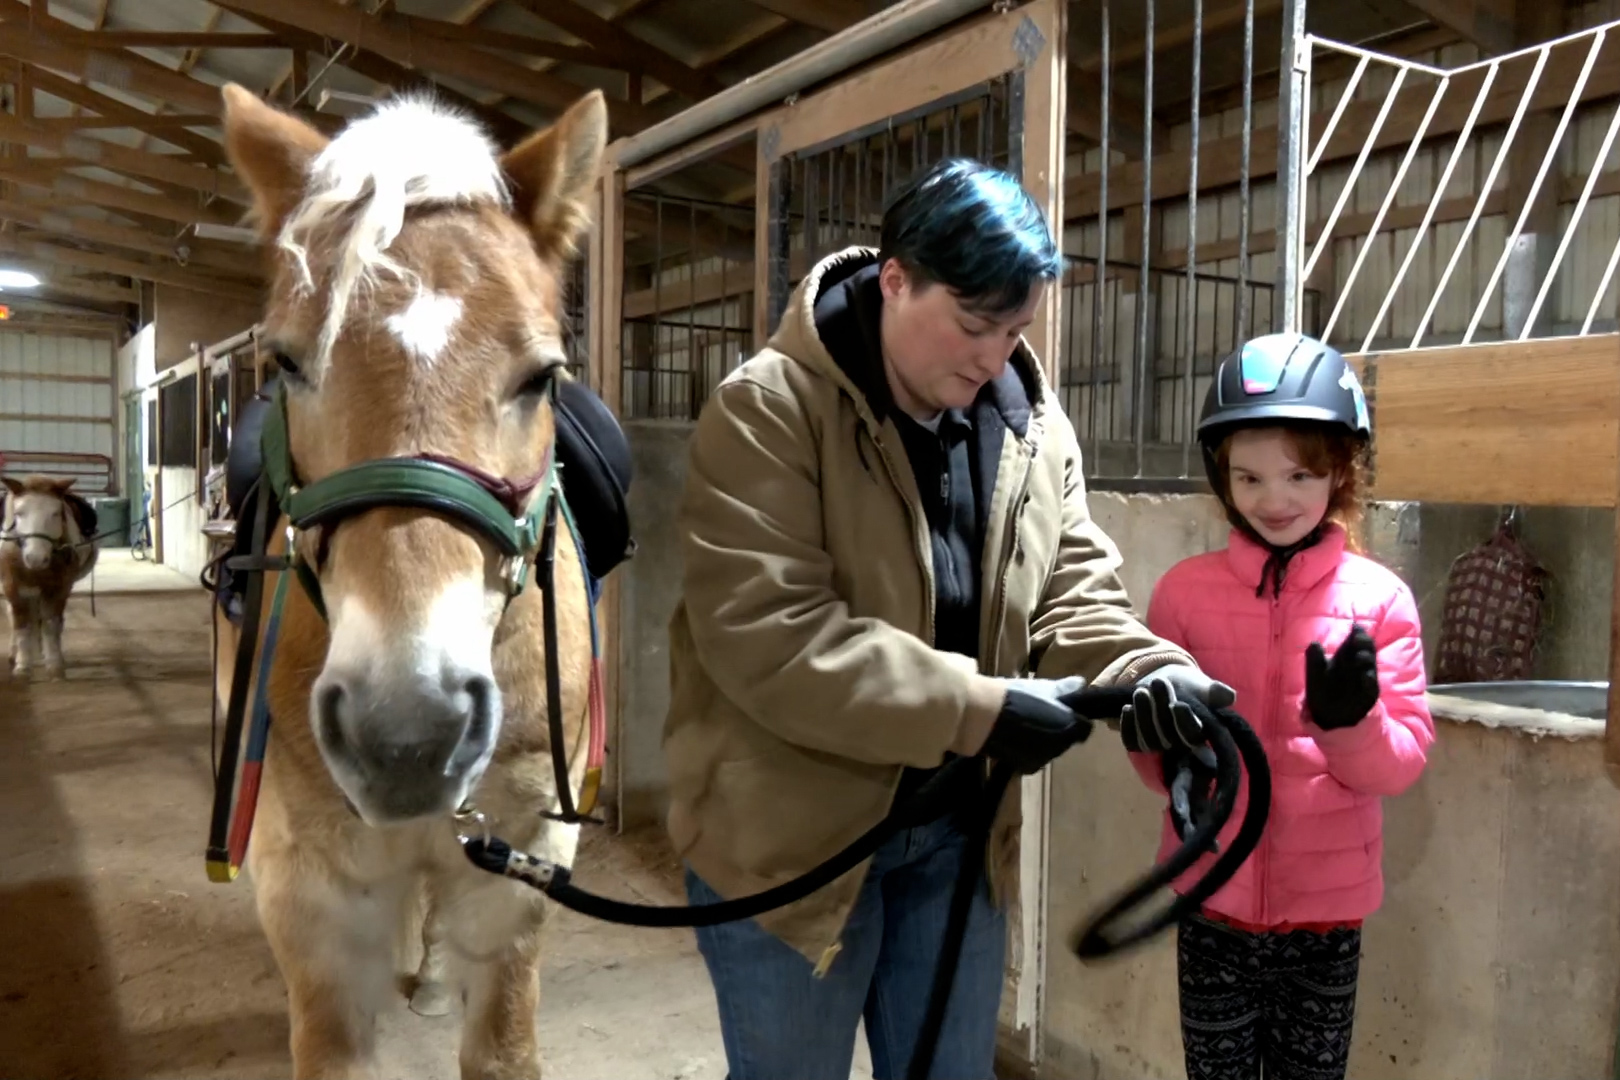 A volunteer helps a young girl with a horse at the PALS Adaptive Riding Center.